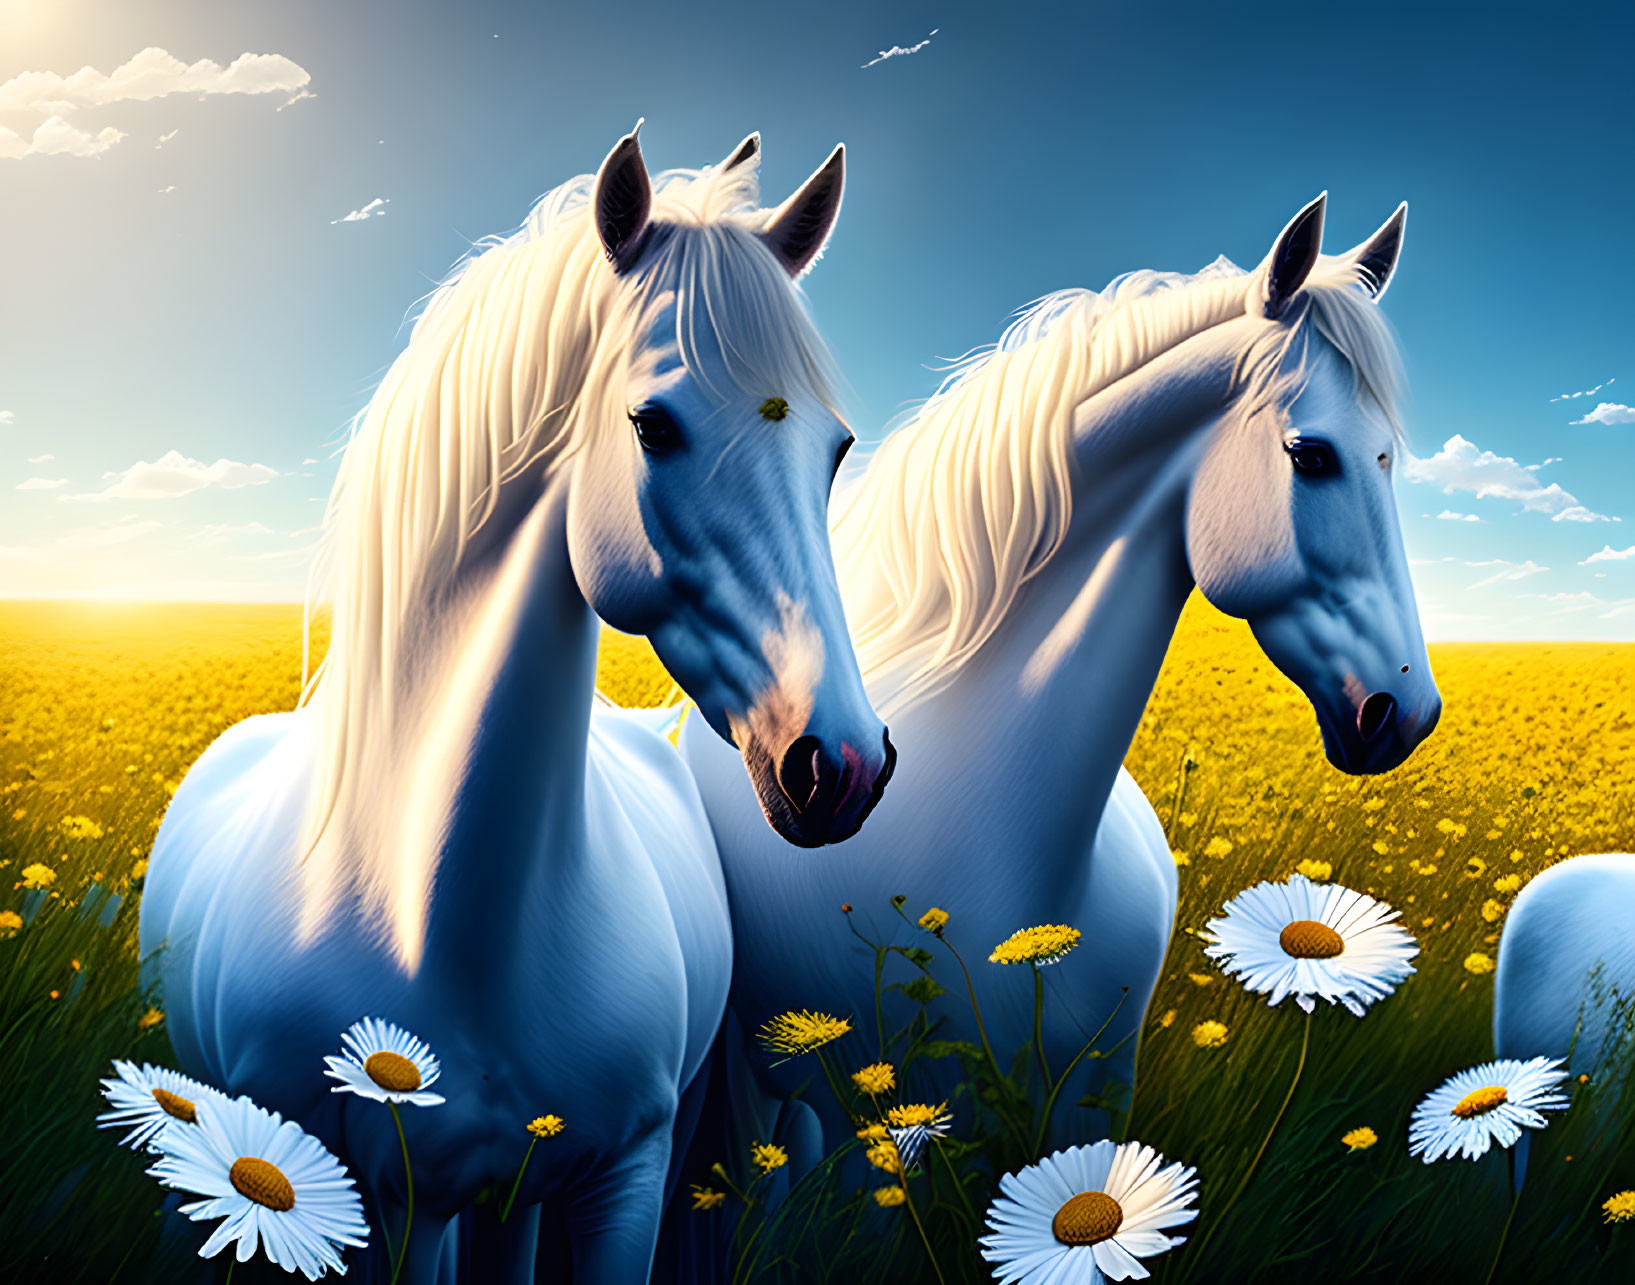 Two White Horses in Vibrant Yellow Flower Field